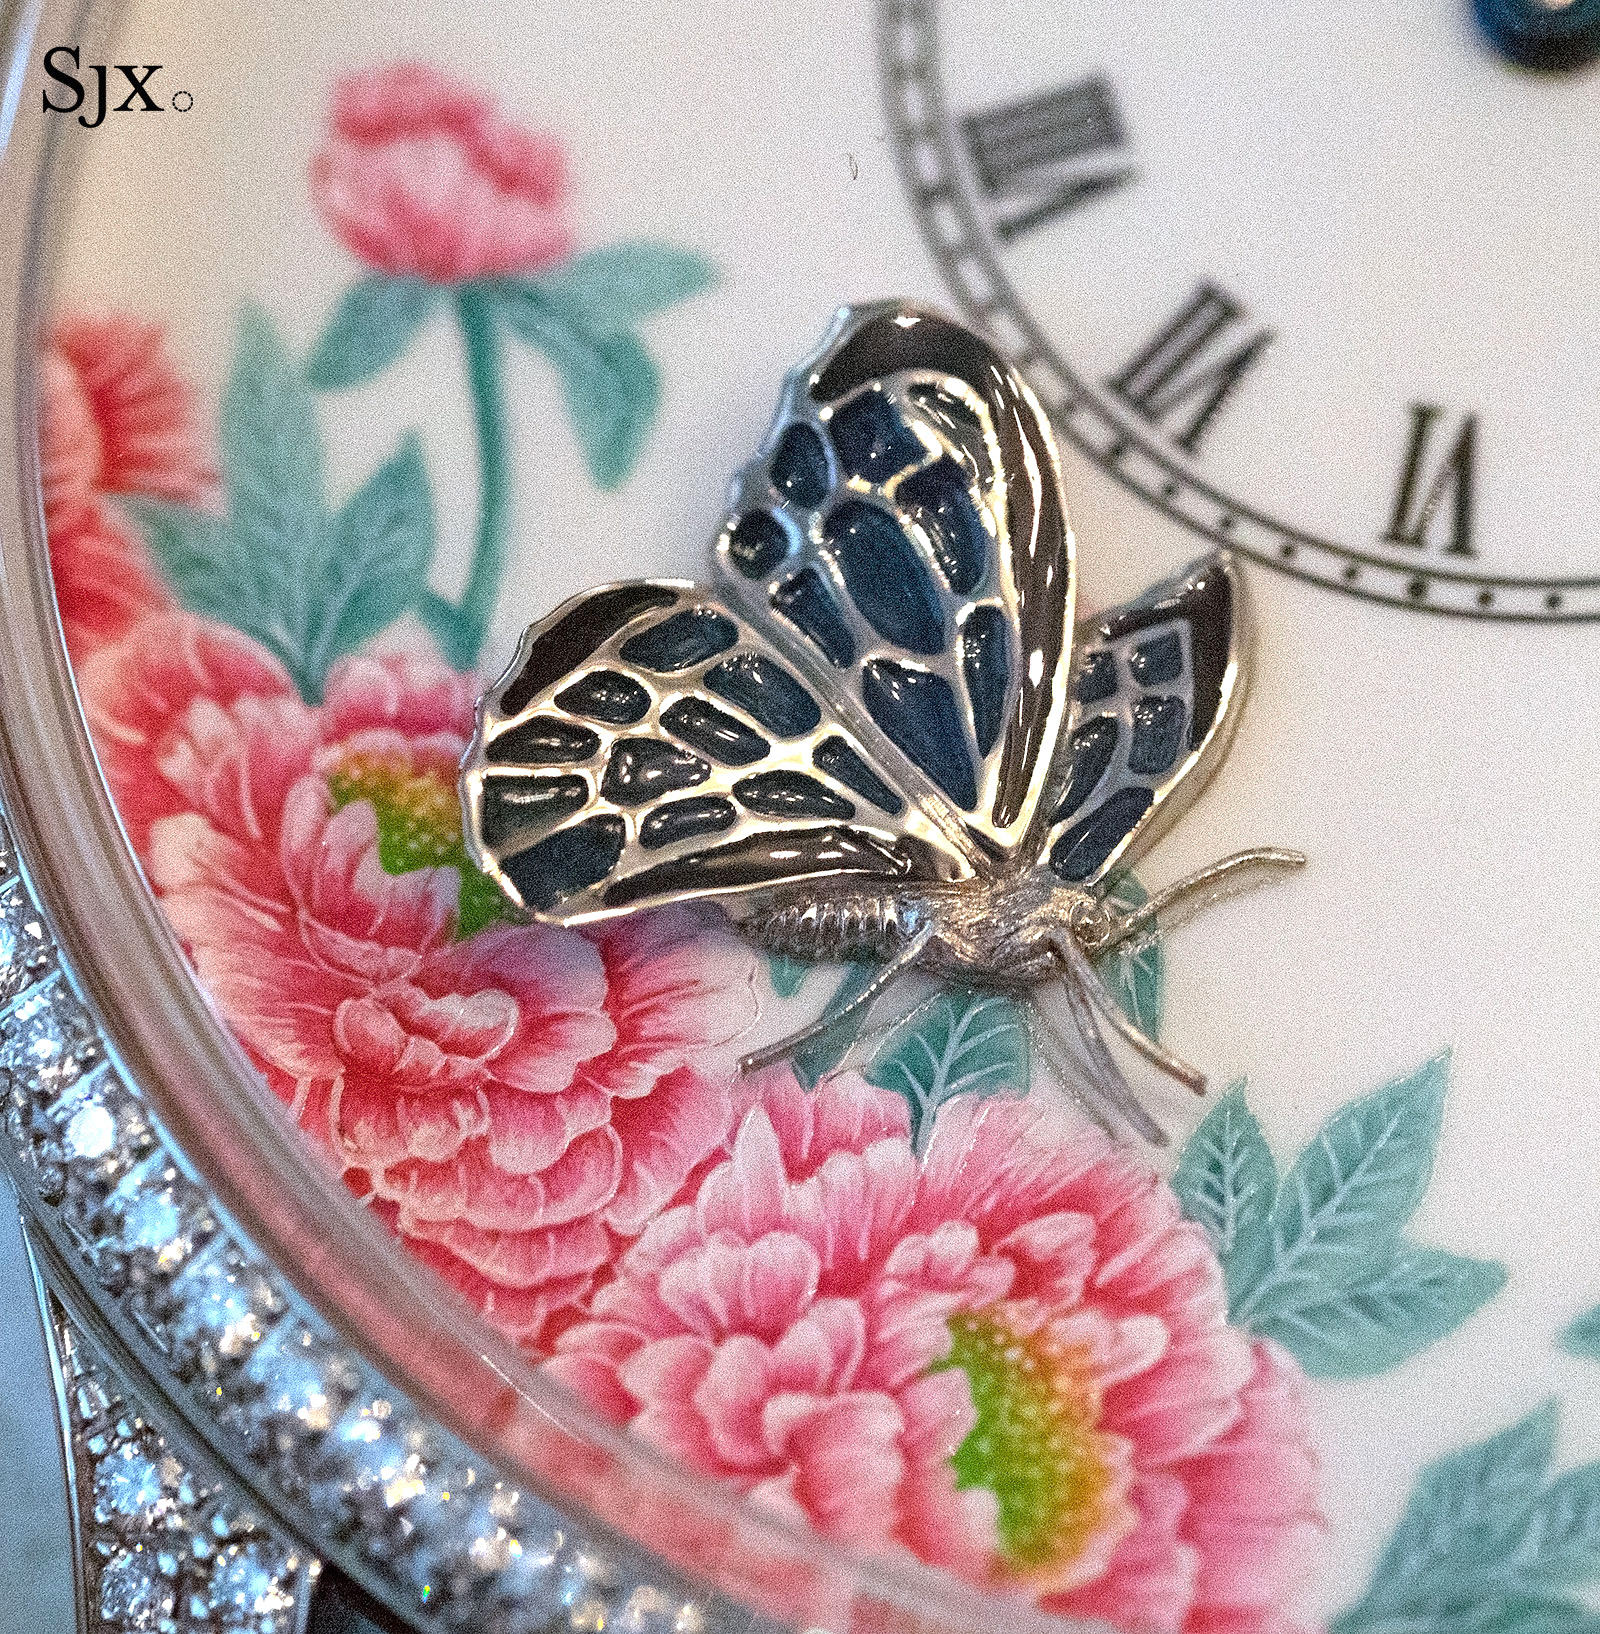 Jaquet Droz Petite Heure Minute The Butterfly Journey 6